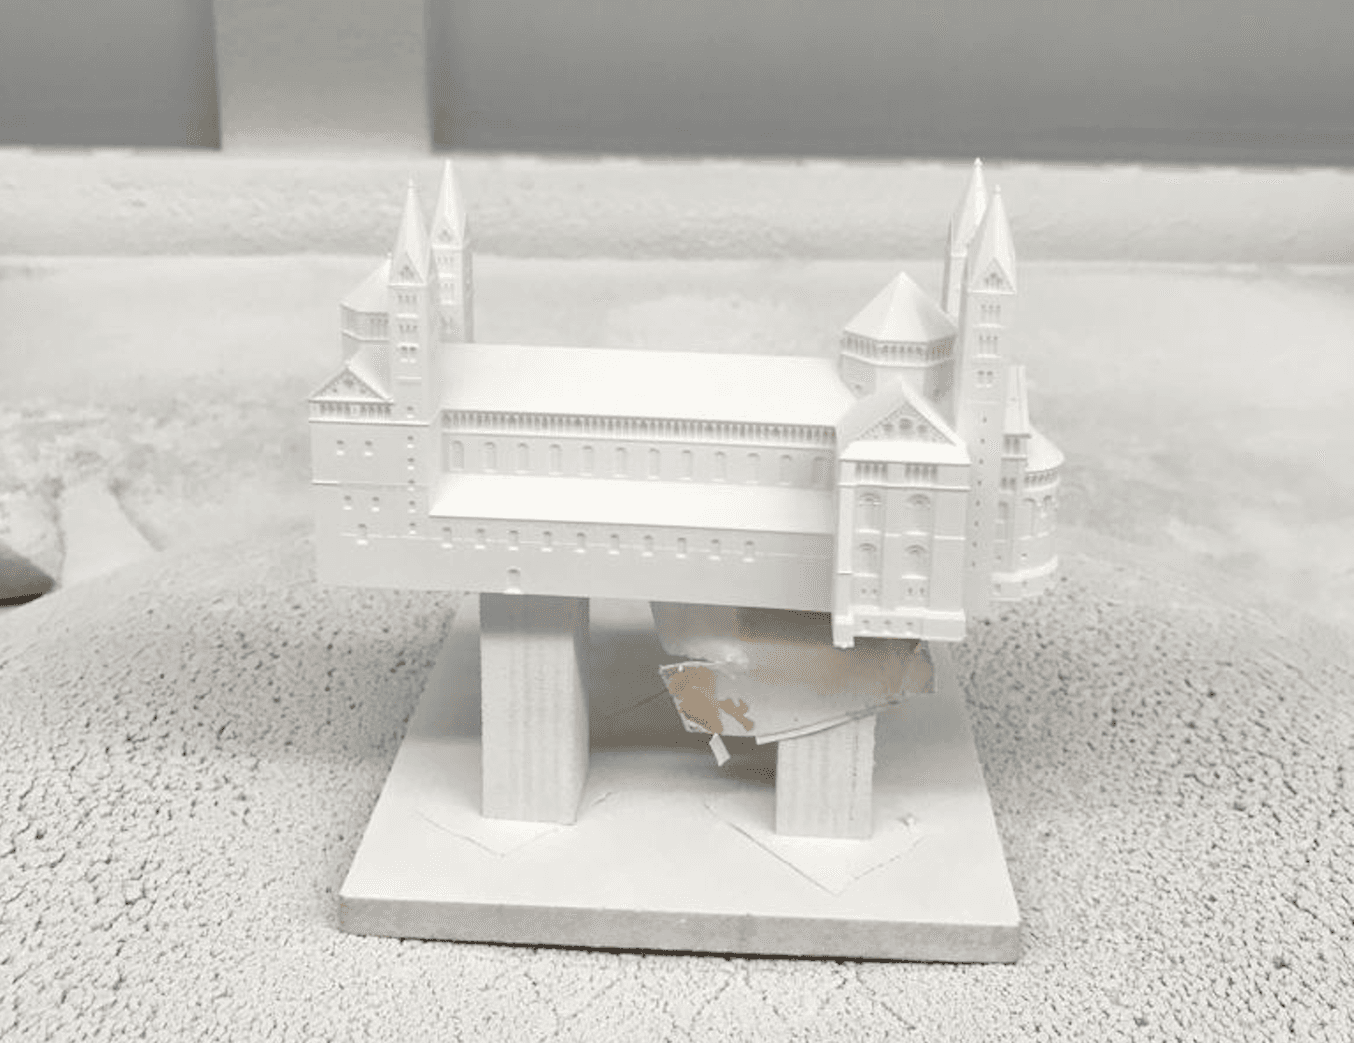 Mahmood relied on Formlabs White Resin to ensure presentable models right out of the printers as well as a high level of detail which the project required. The details can be seen especially well in the displayed roman cathedral from Speyer in the period o